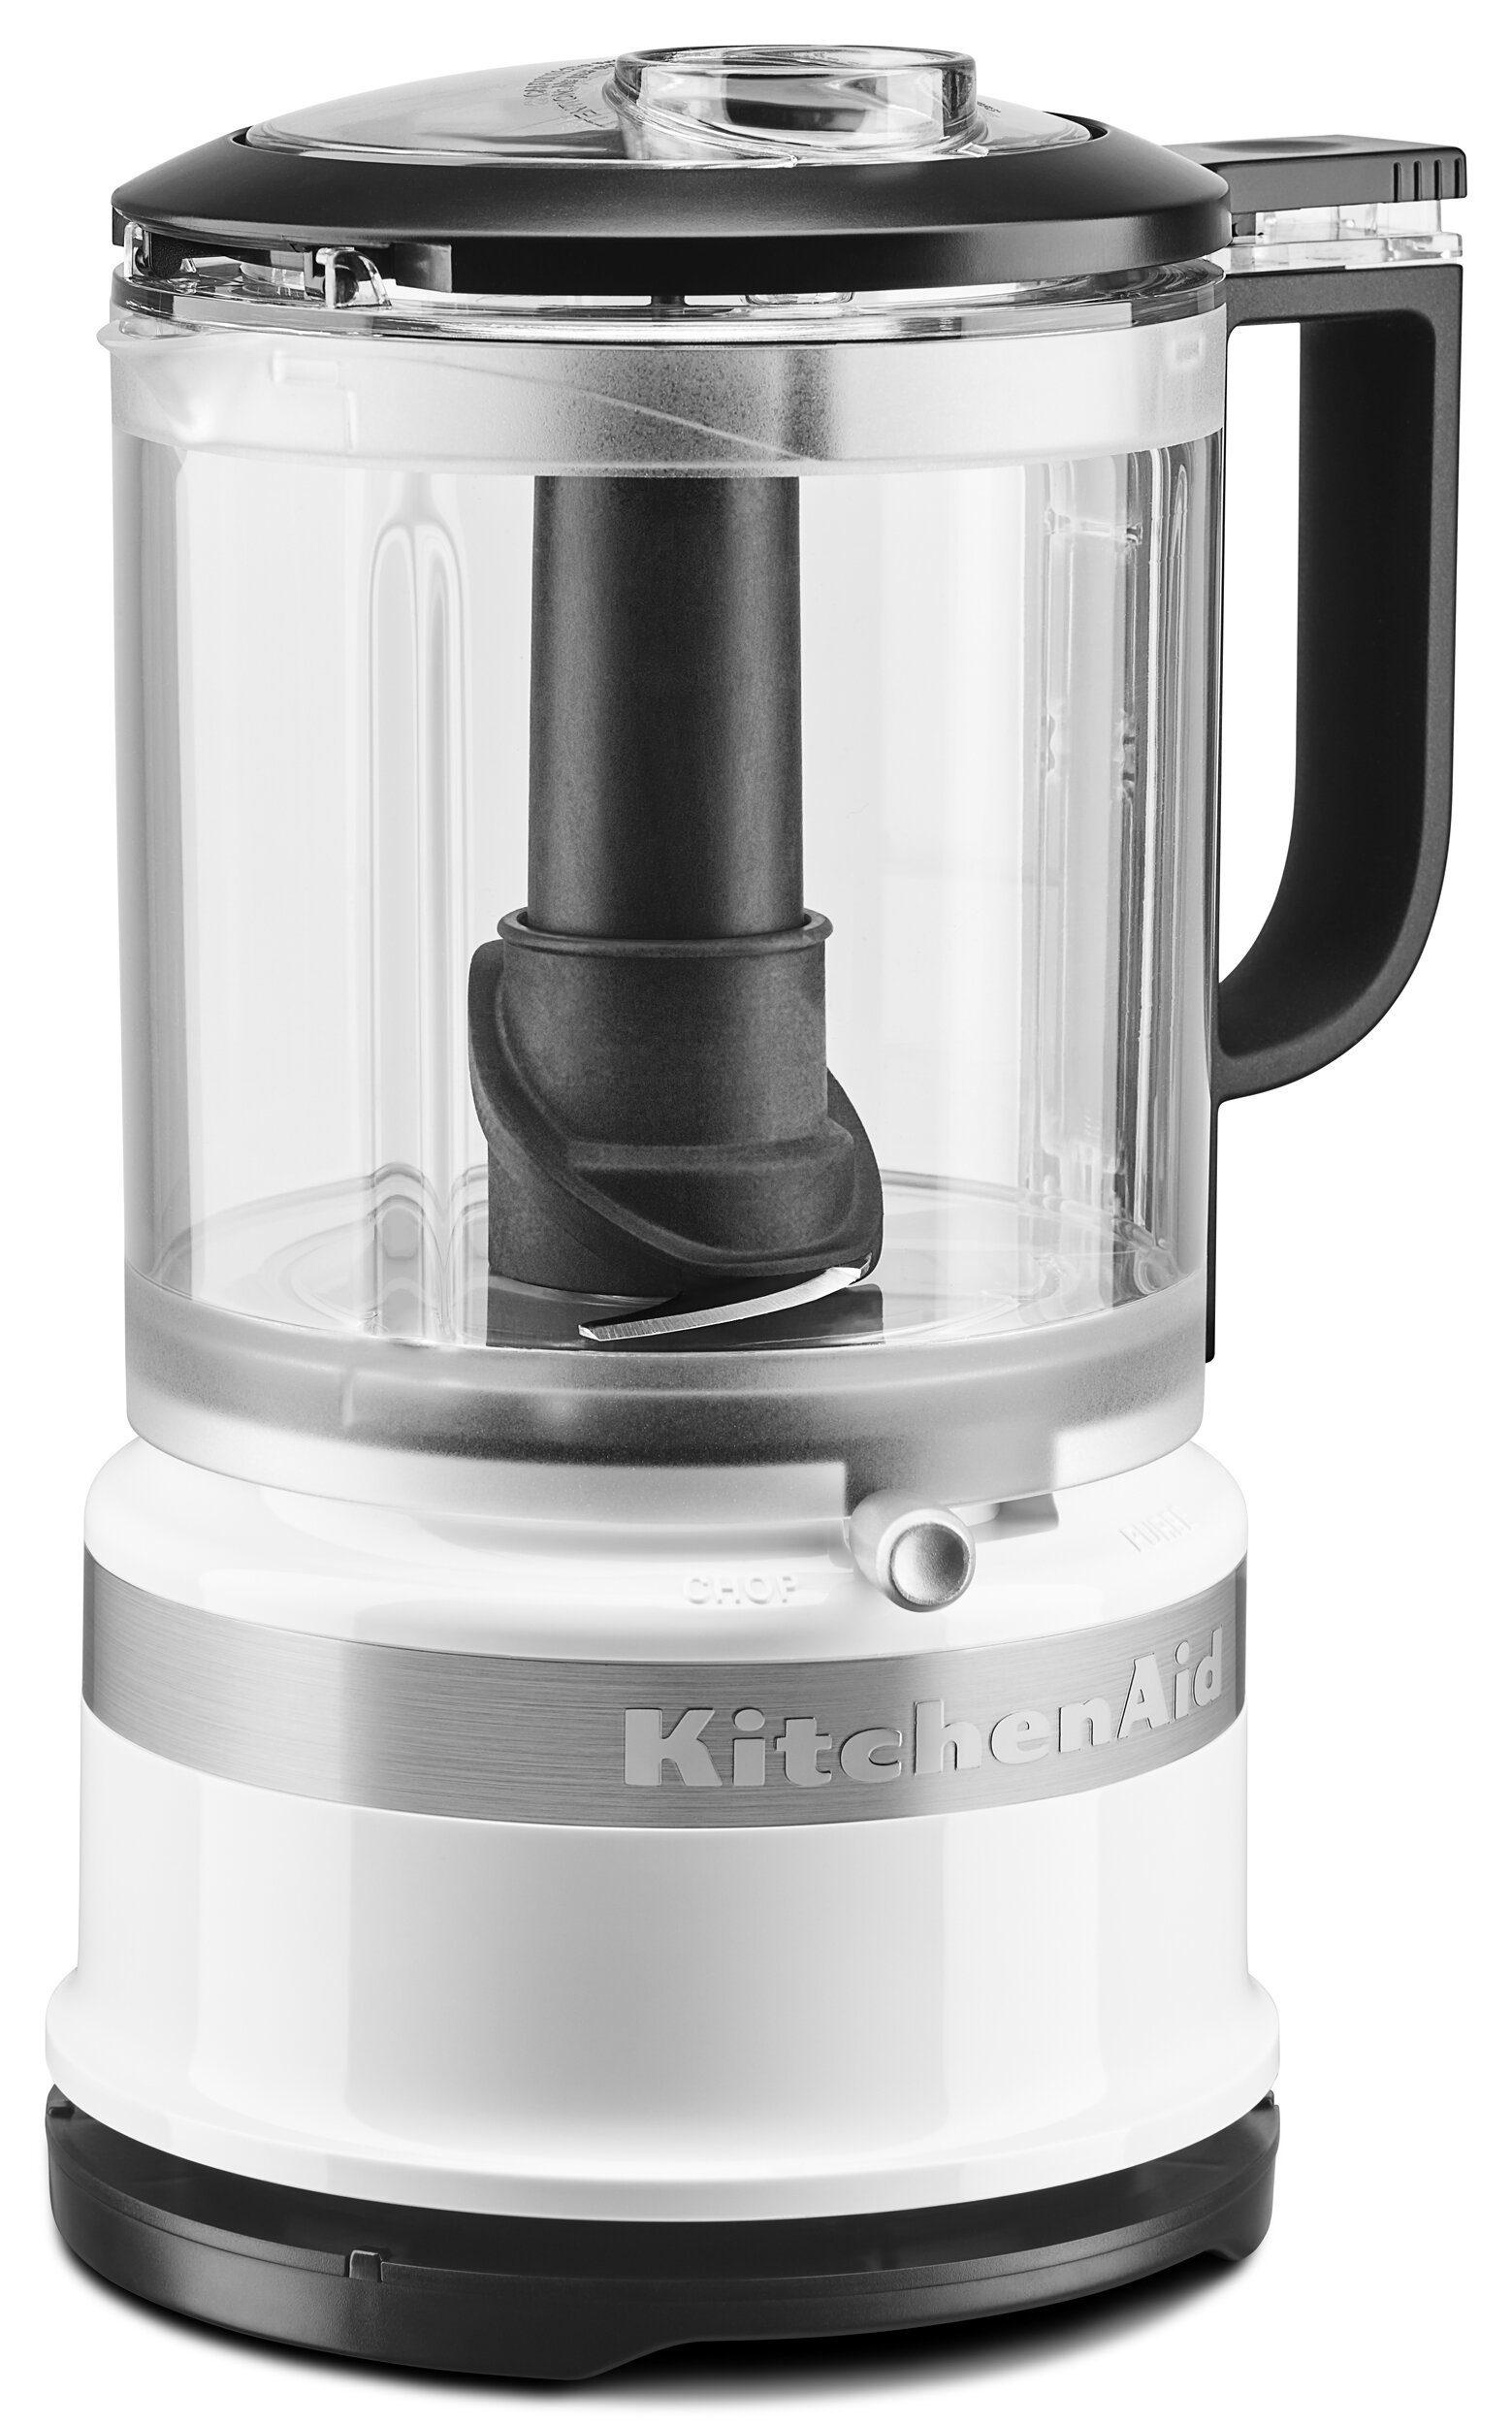 Hamilton Beach Food Processor & Vegetable Chopper for Slicing, Shredding,  Mincing, and Puree, 8 Cup, Black and BLACK+DECKER Lightweight Hand Mixer